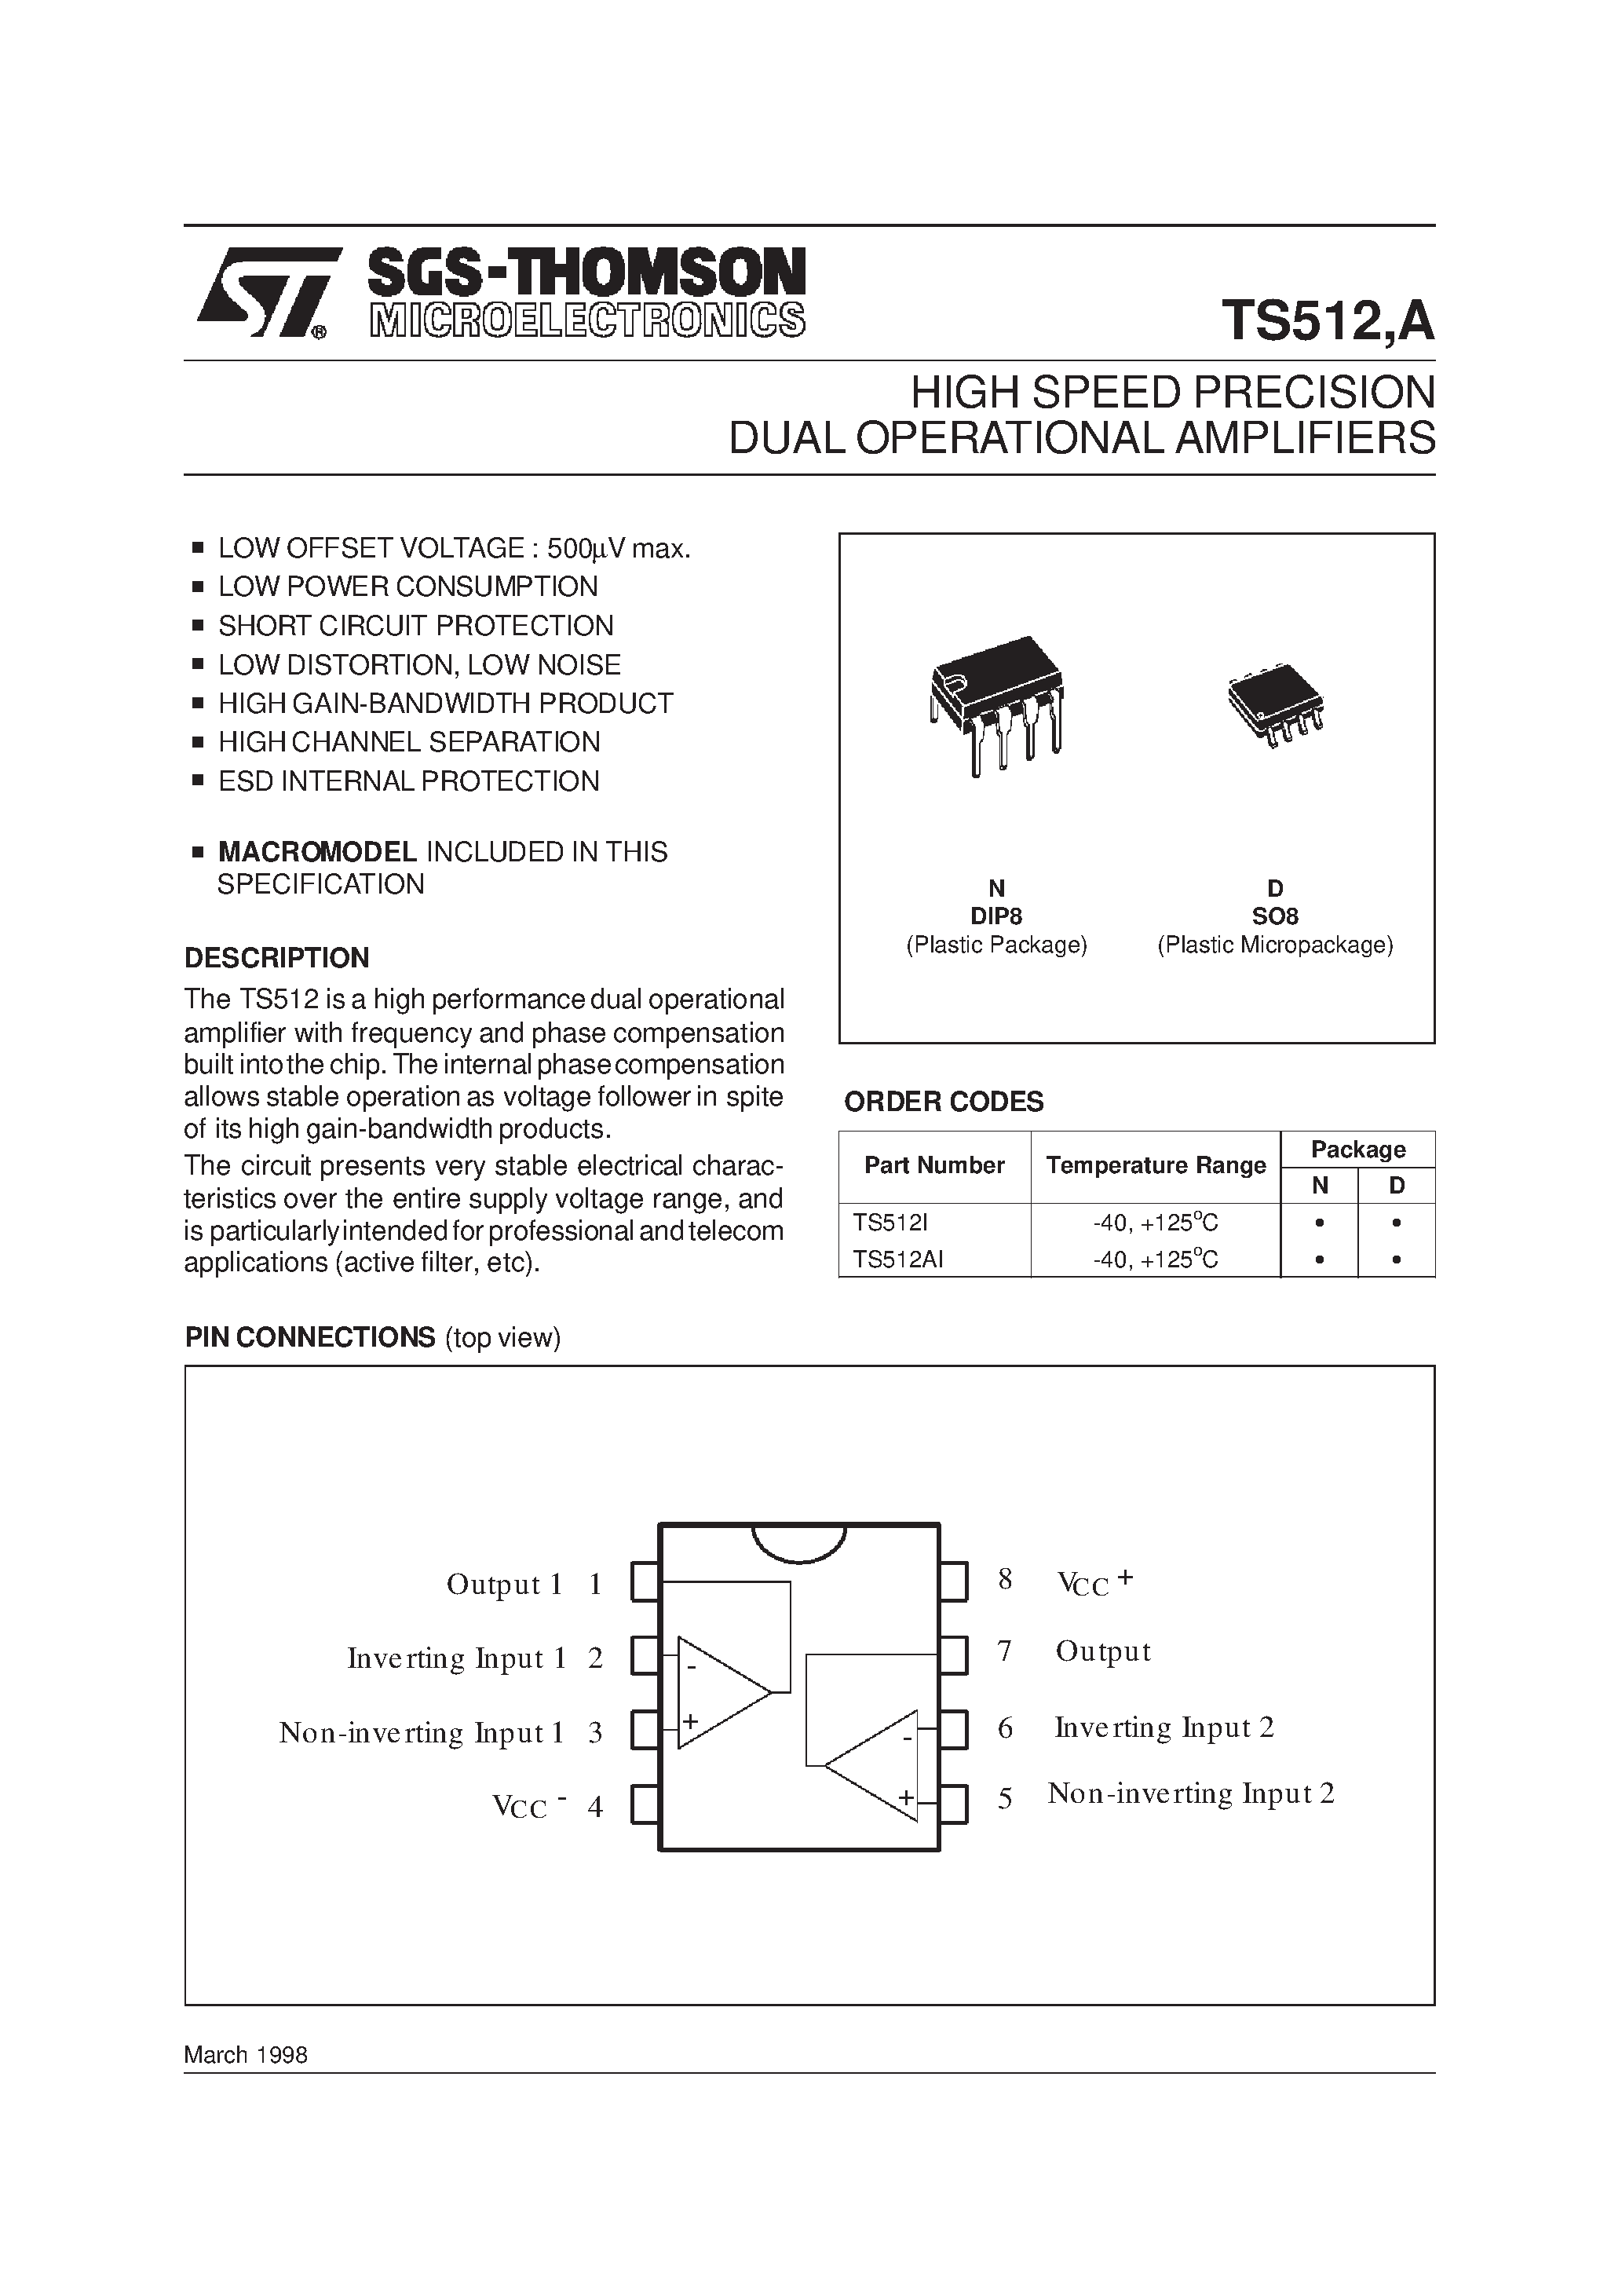 Datasheet TS512AID - HIGH SPEED PRECISION DUAL OPERATIONAL AMPLIFIERS page 1